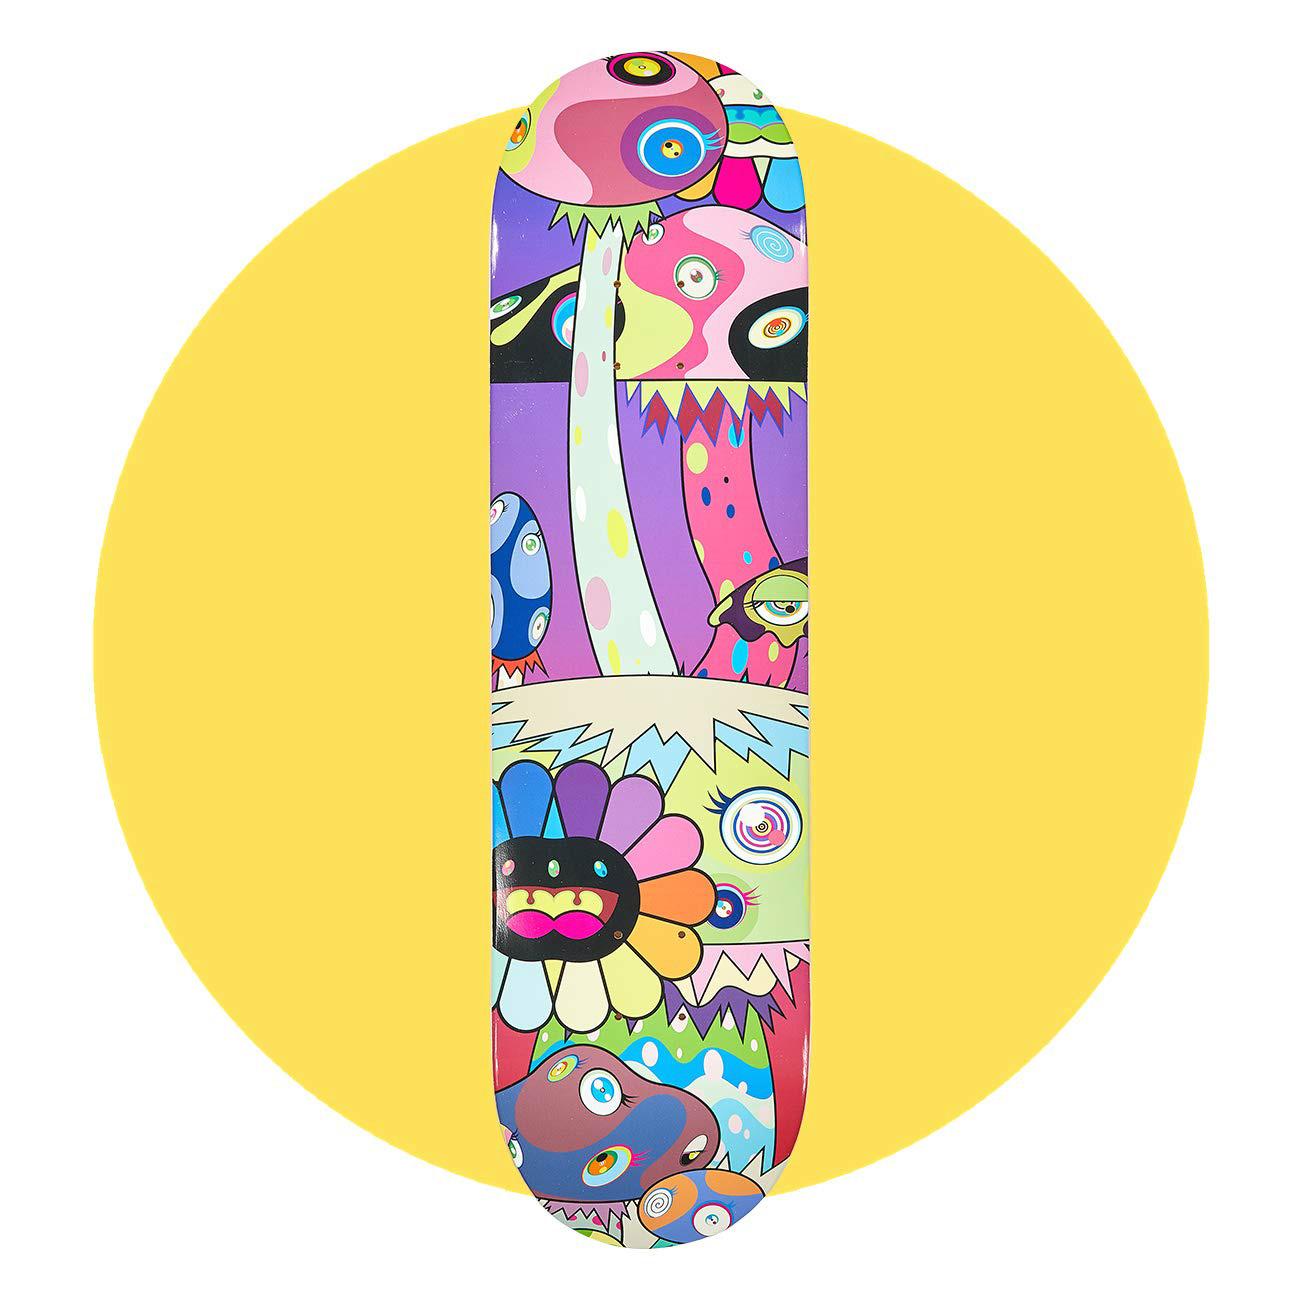 Takashi Murakami Skateboard Deck:
A vibrant piece of Takashi Murakami wall art produced as a completely sold out, limited series in 2019 in conjunction with Complexcon and Kaikai Kiki co. This deck is new in its original packaging. A brilliant piece